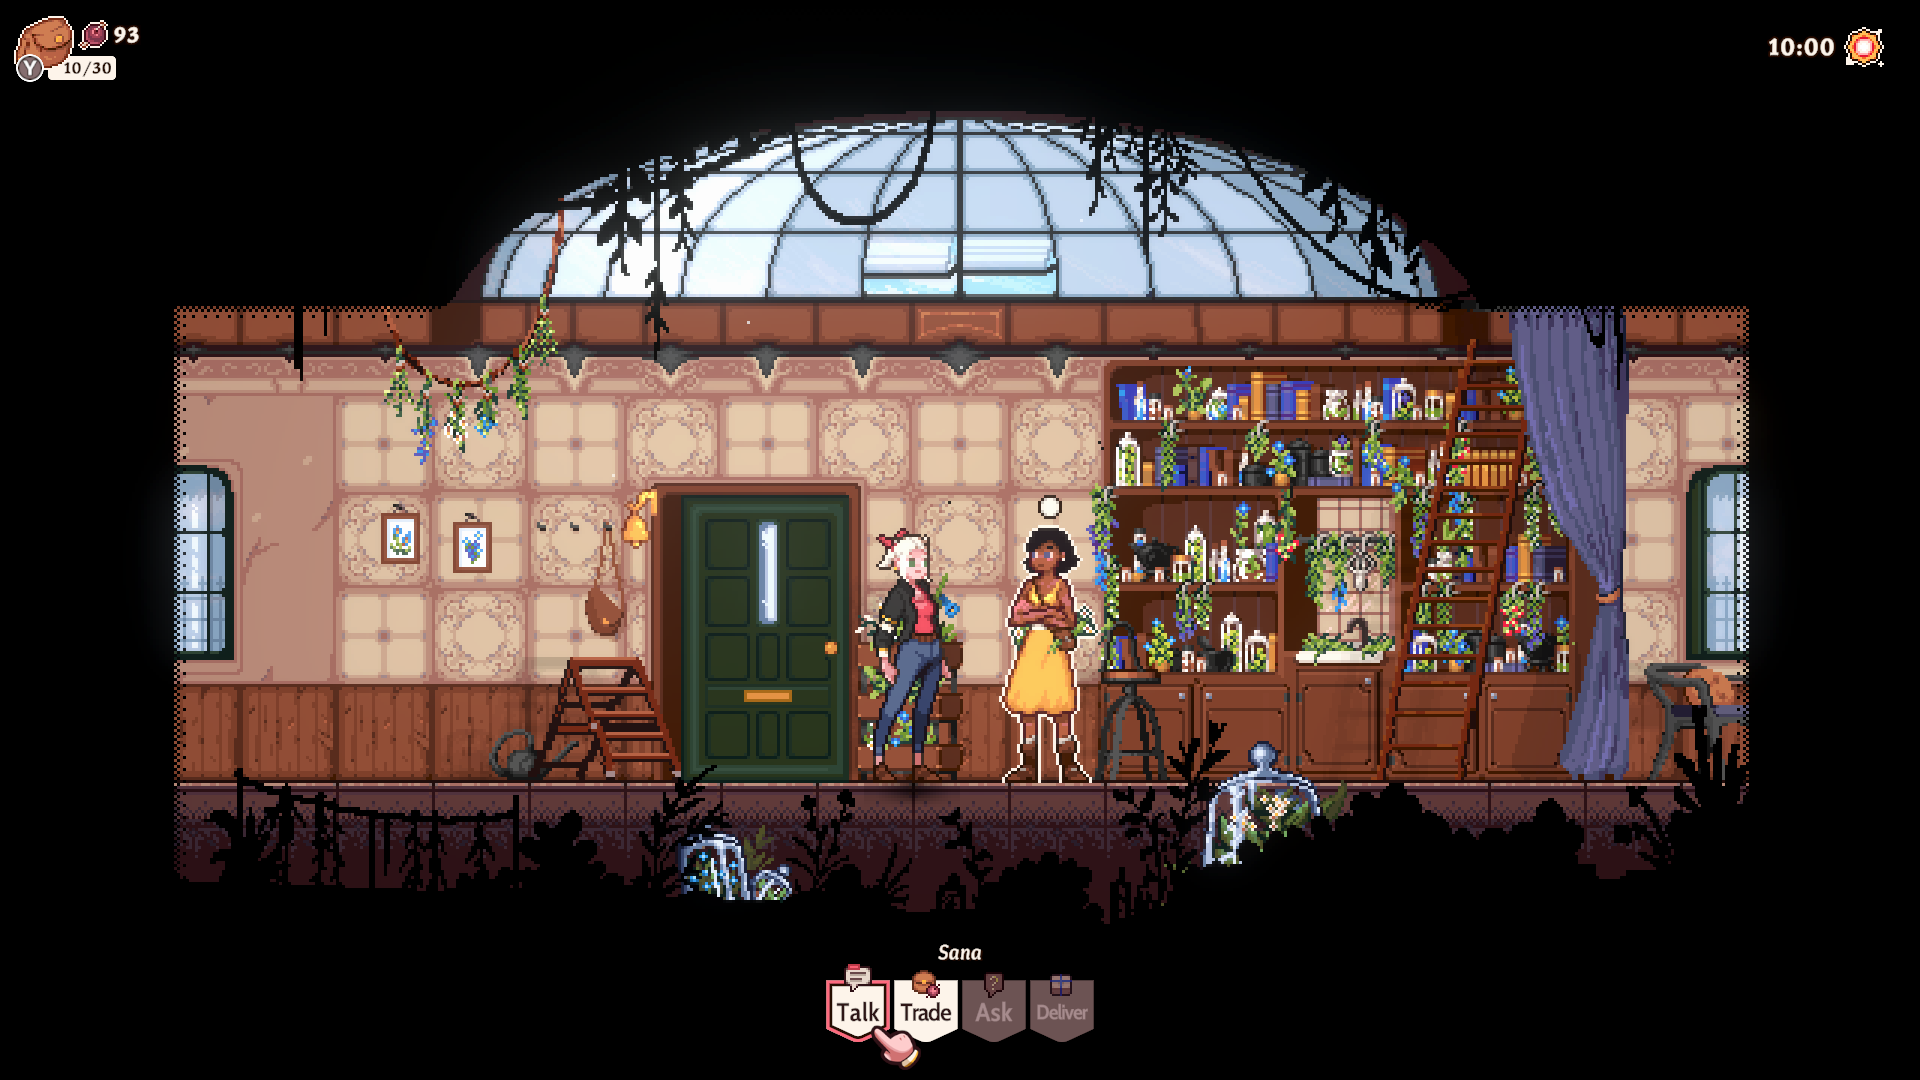 Gameplay Screenshot of Flora initiating Dialogue to the Herbalist Sana inside her store.